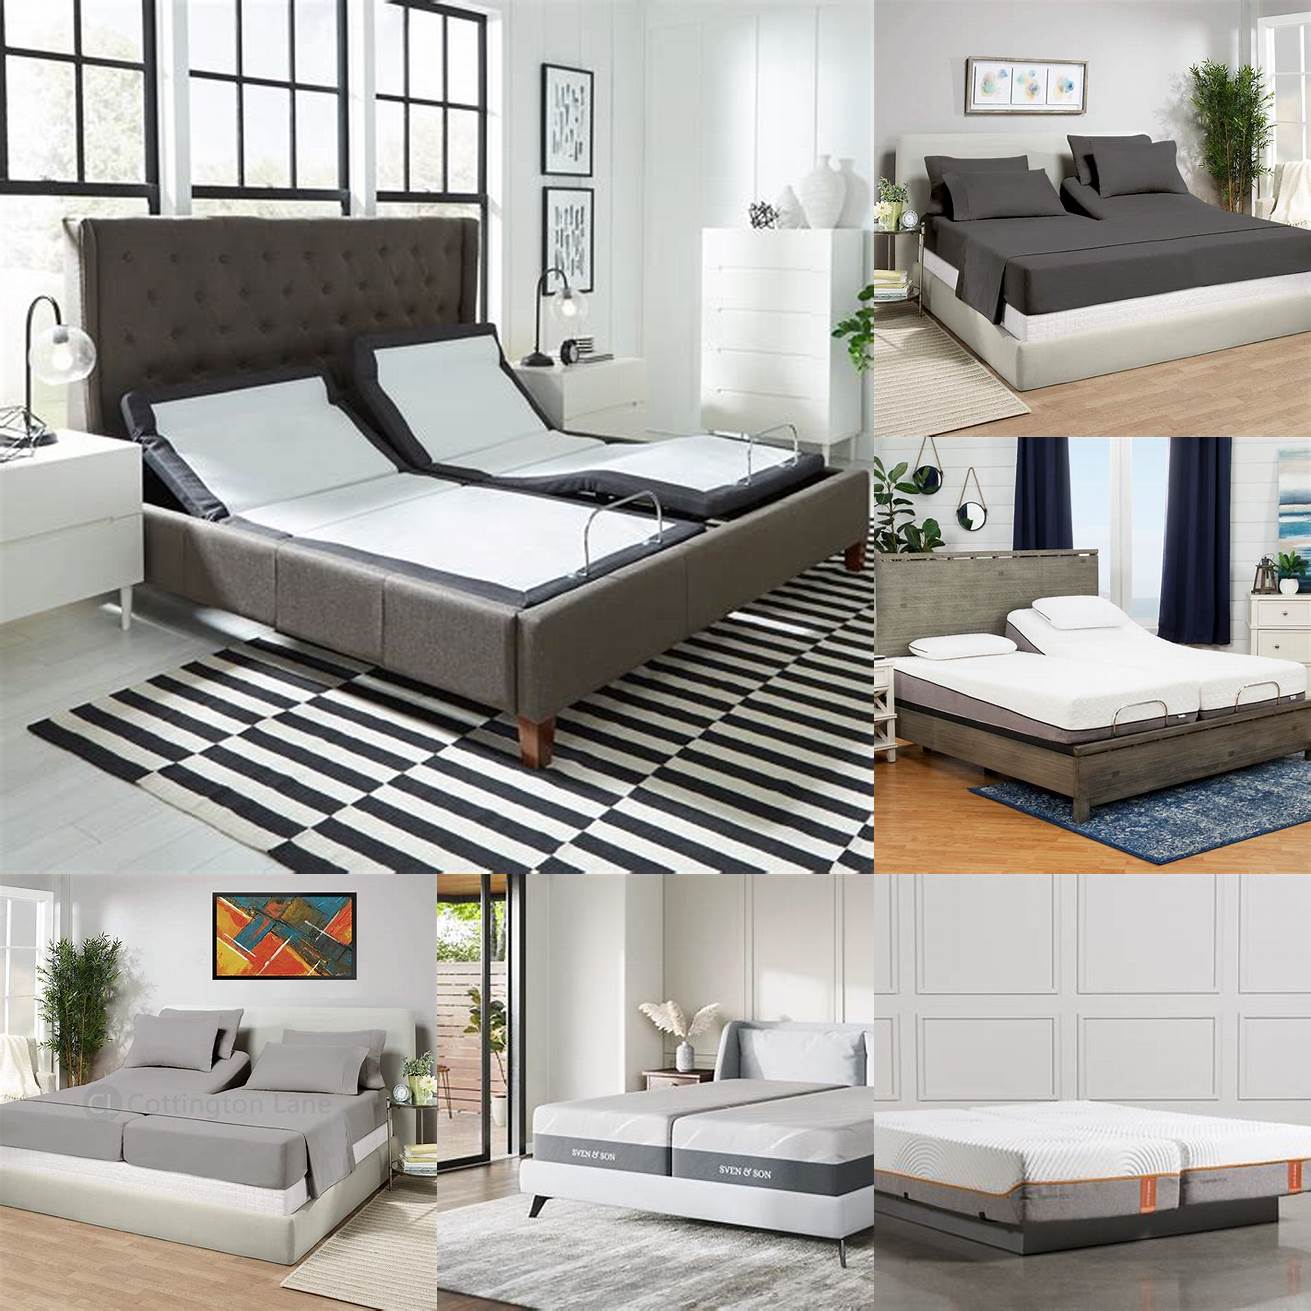 Split California King Bed This type of bed consists of two mattresses each measuring 36 inches wide and 84 inches long It is a good option for couples who have different sleeping preferences